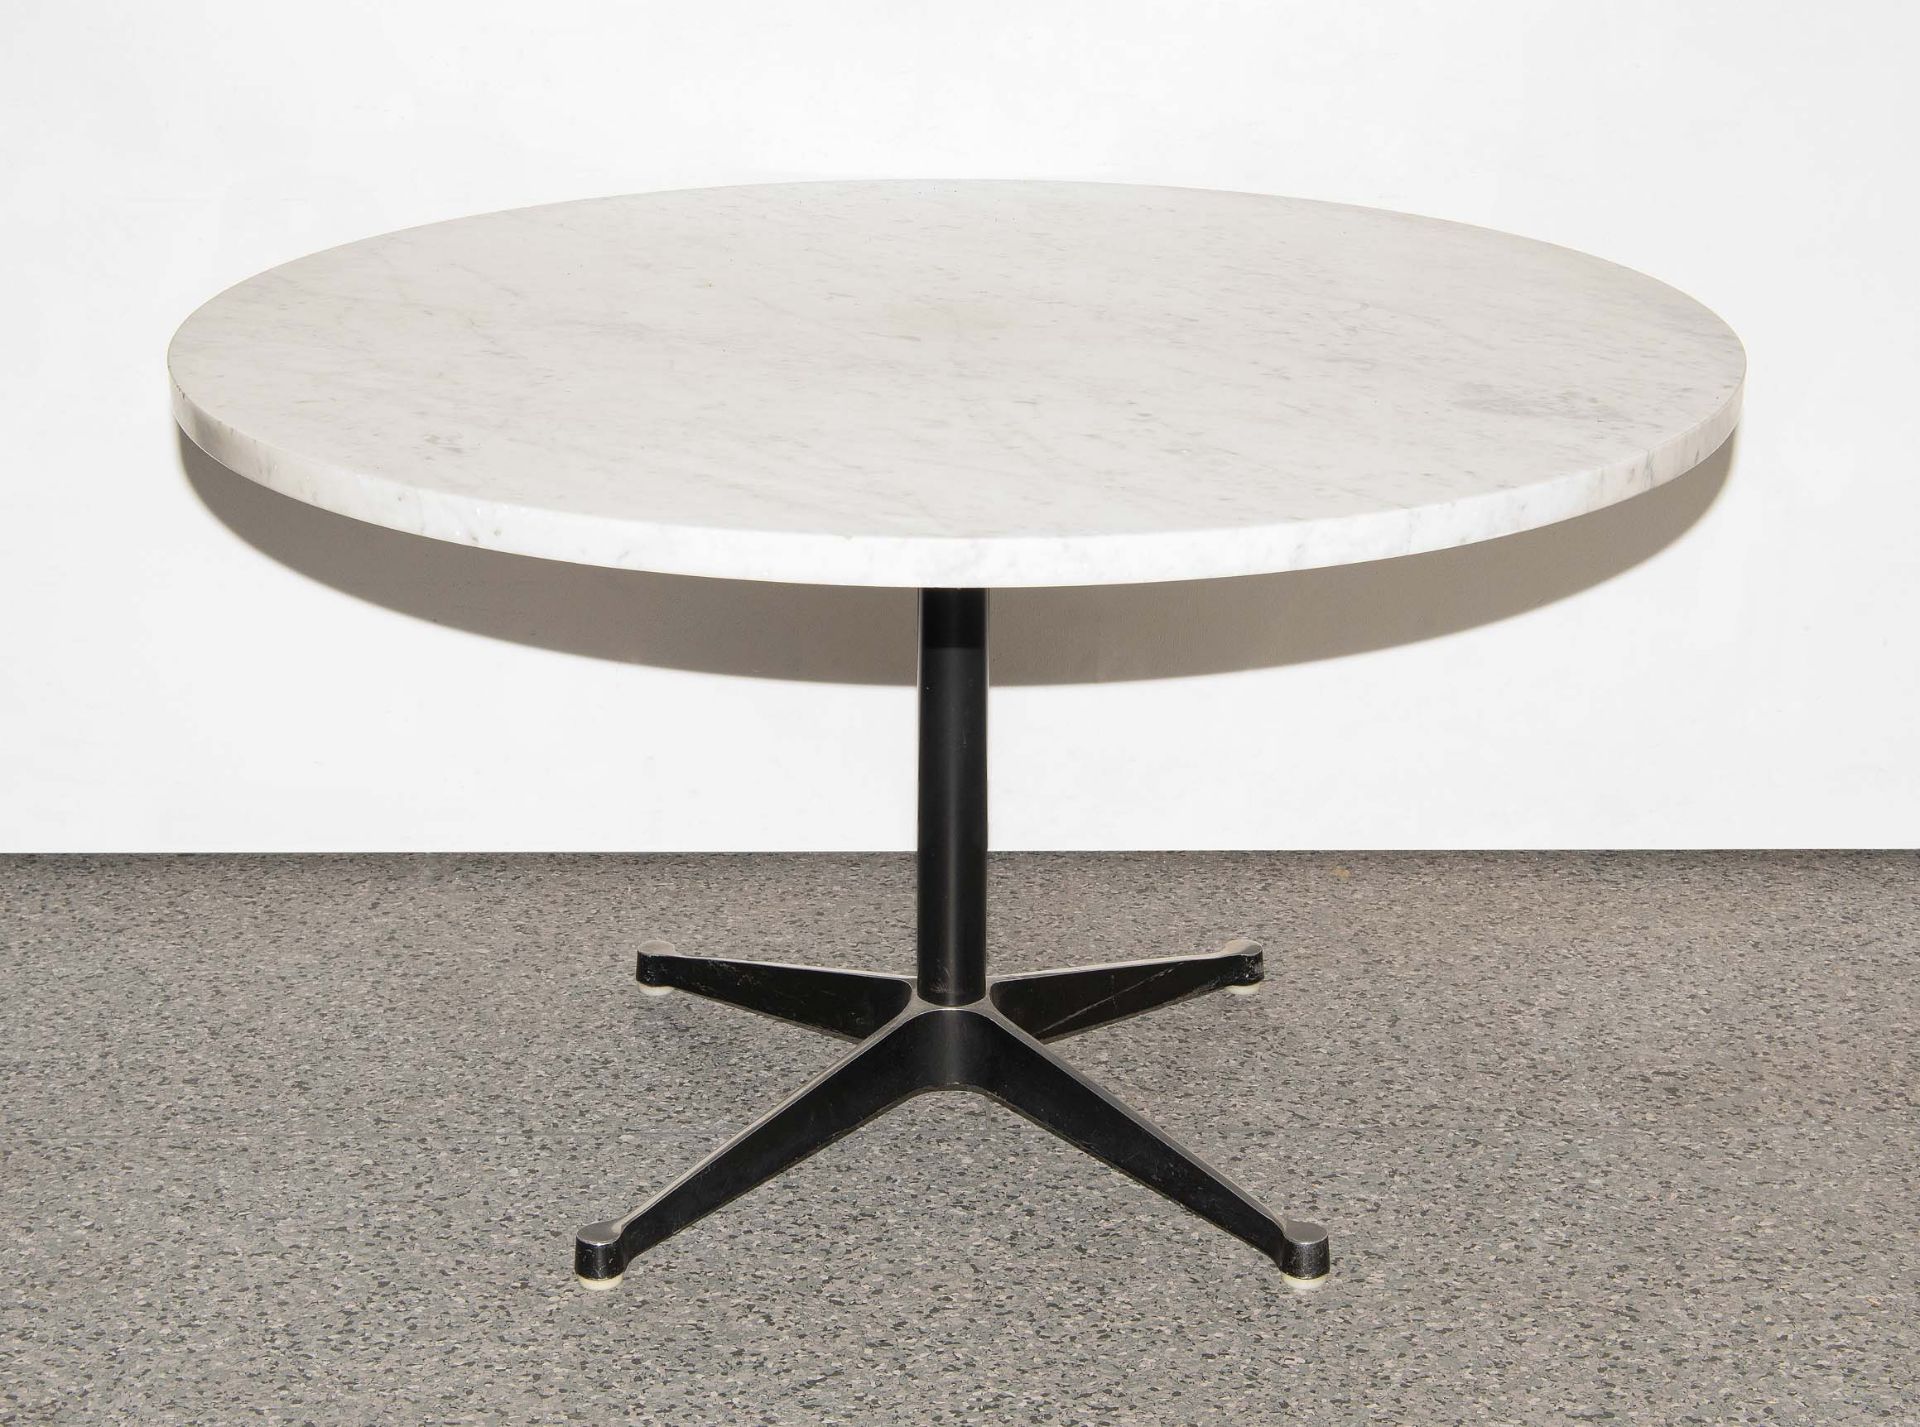 Charles & Ray Eames, Esstisch "Contract Table"